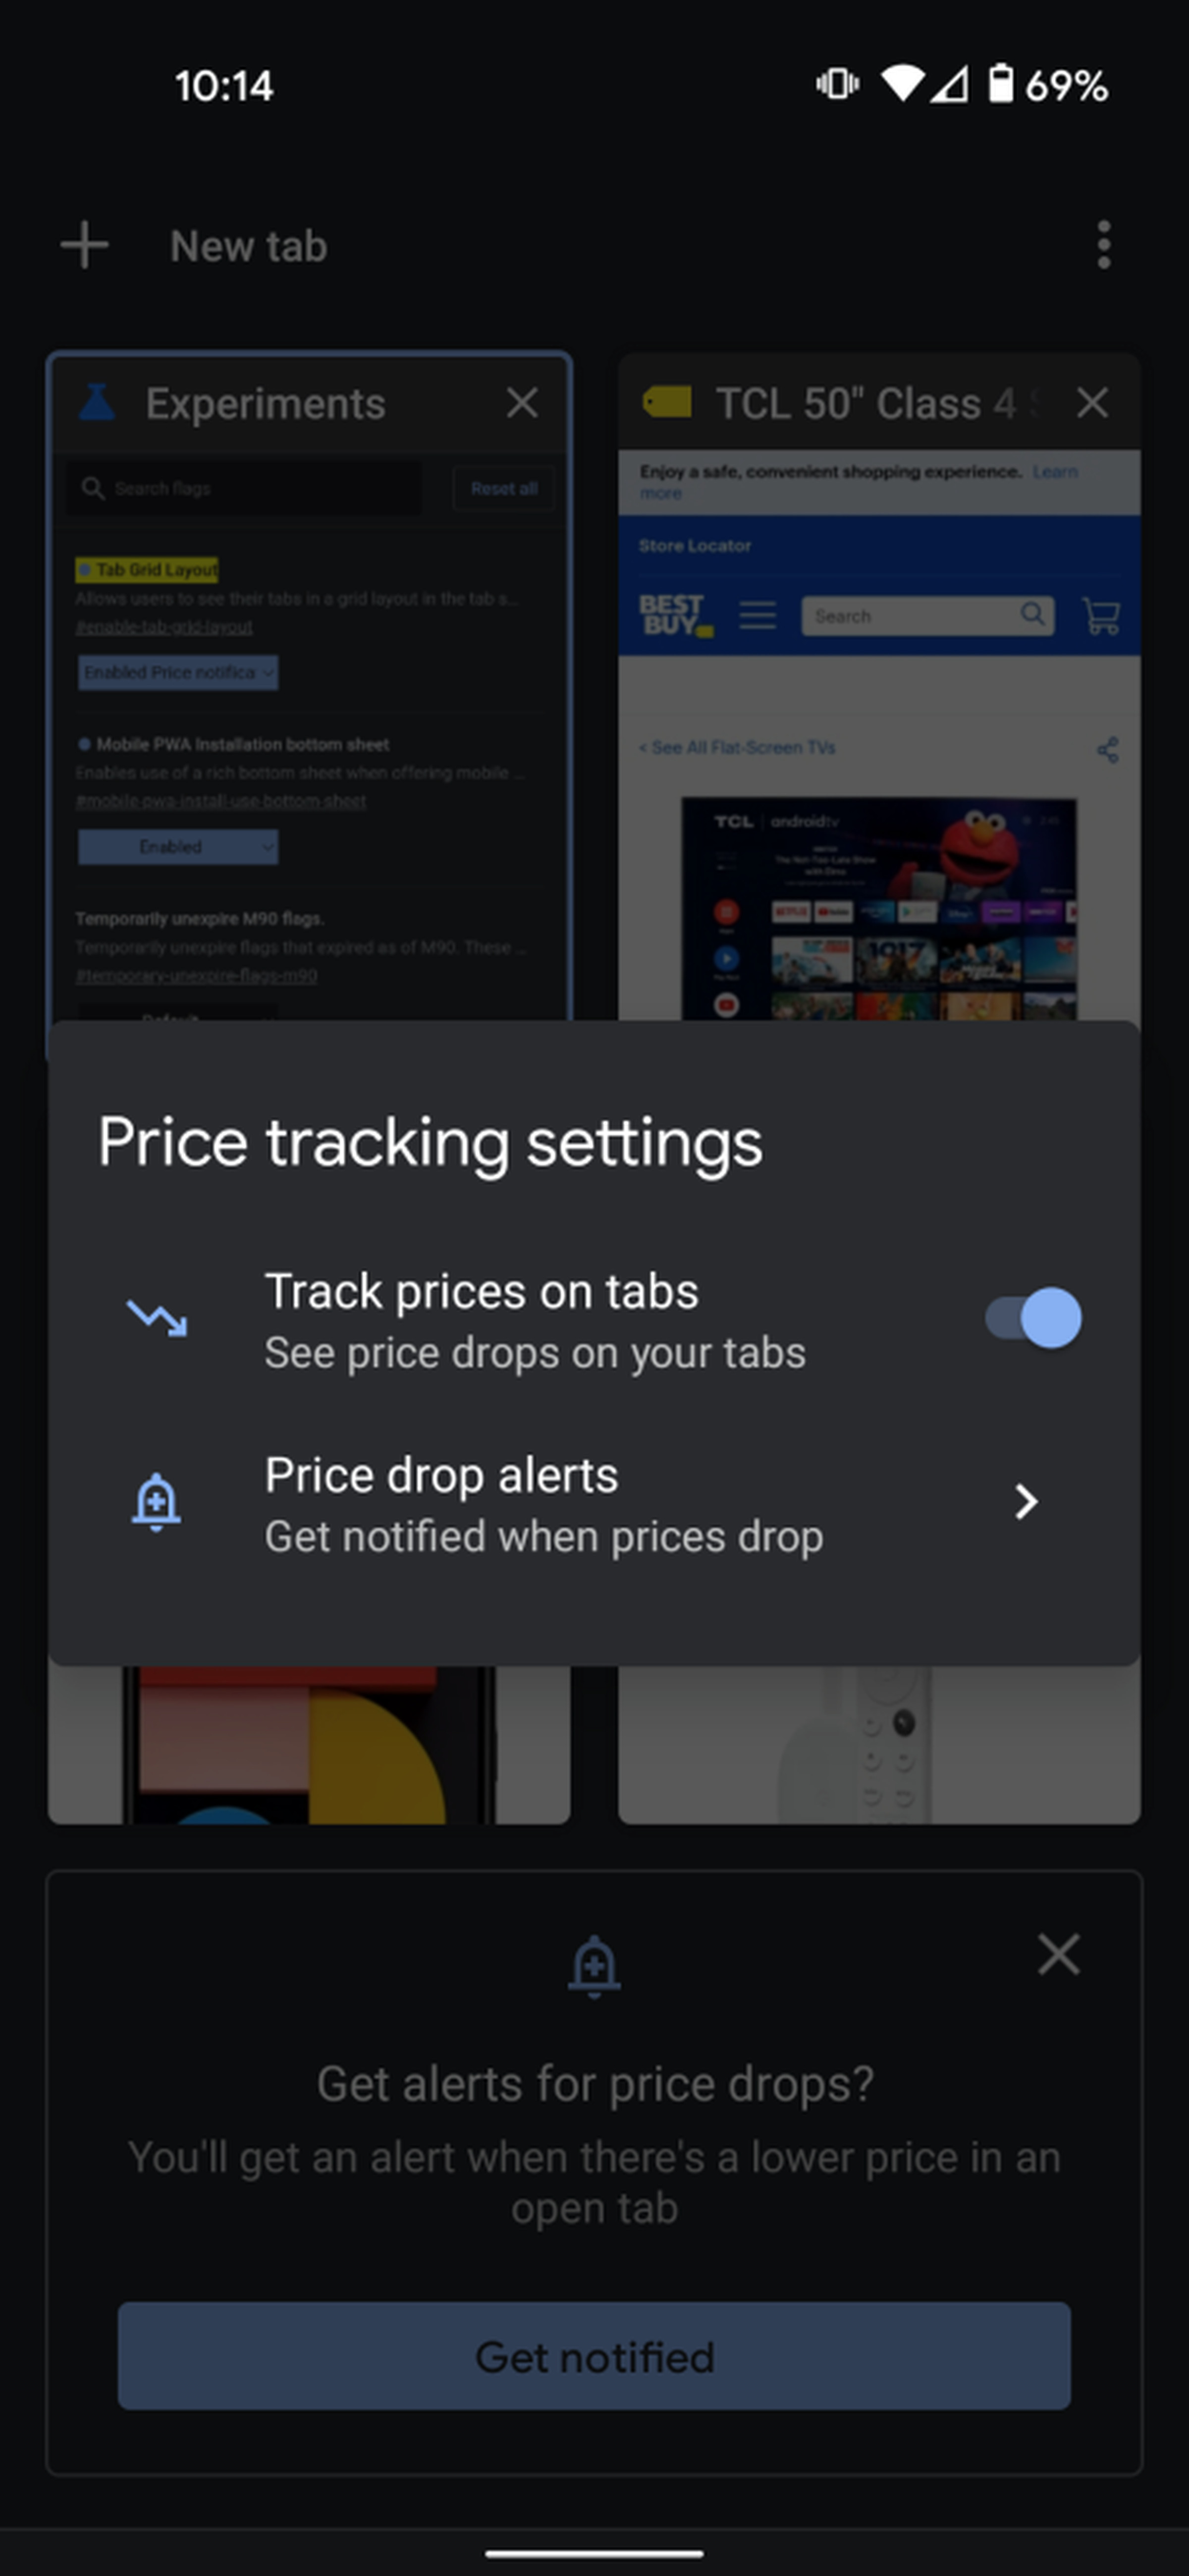 The tool promises to let you “See price drops on your tabs.”